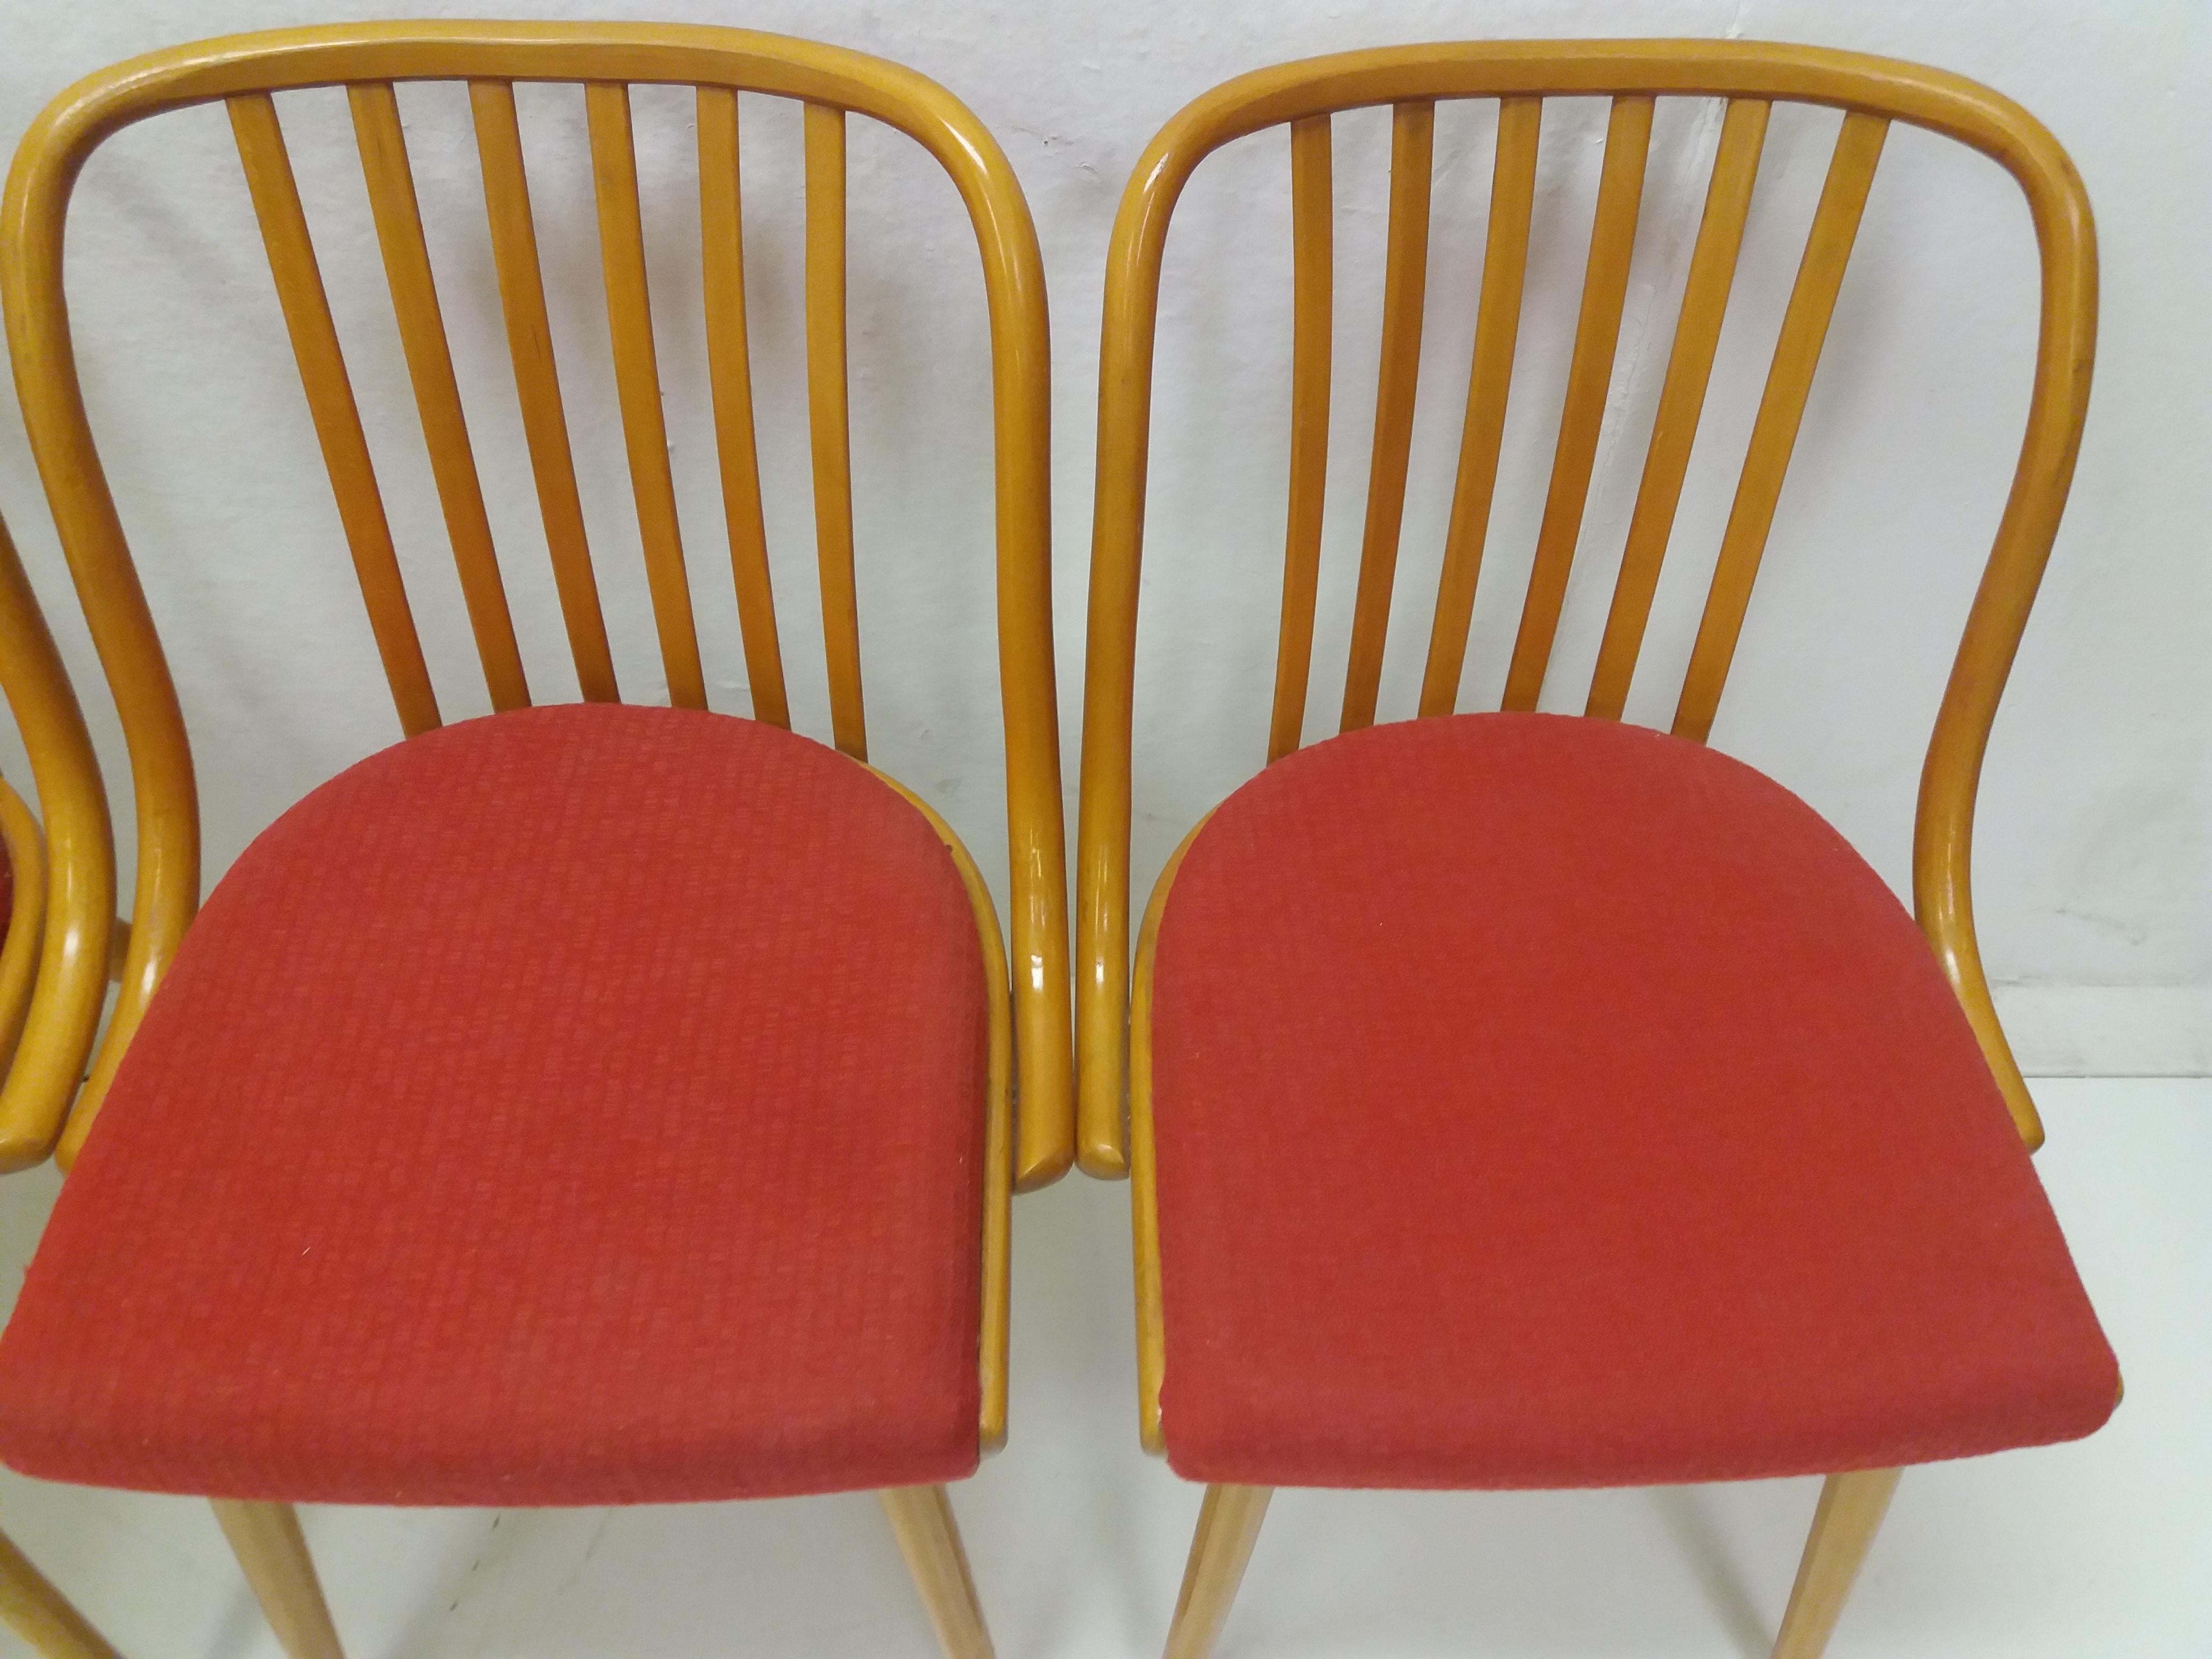 1960 Set of 4 Retro Suman Chairs and Table, Czechoslovakia For Sale 5